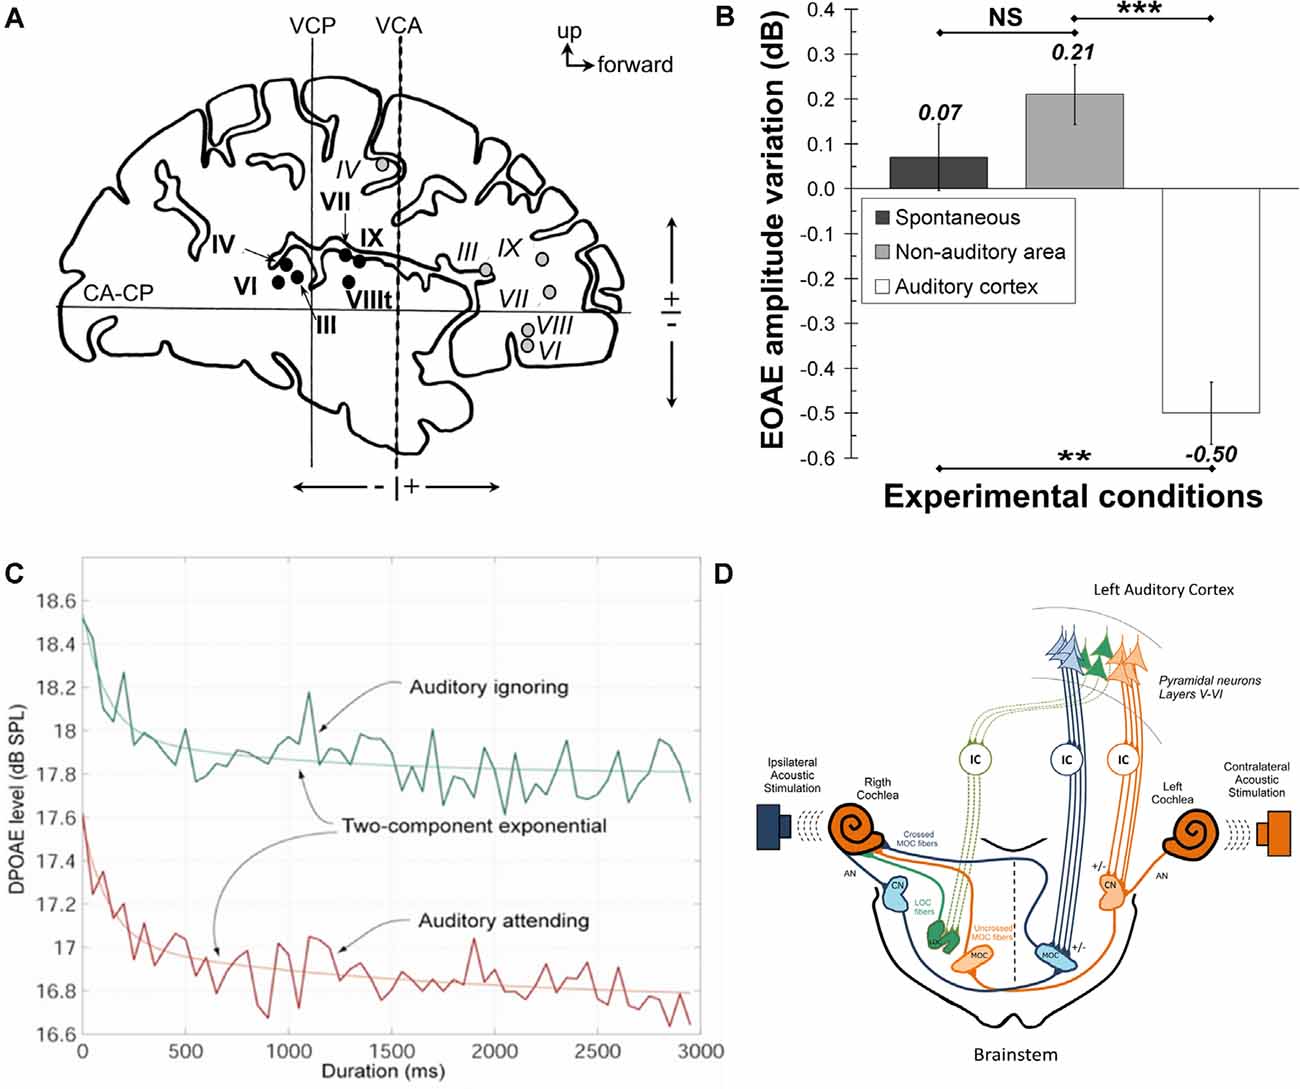 Frontiers  Top-Down Inference in the Auditory System: Potential